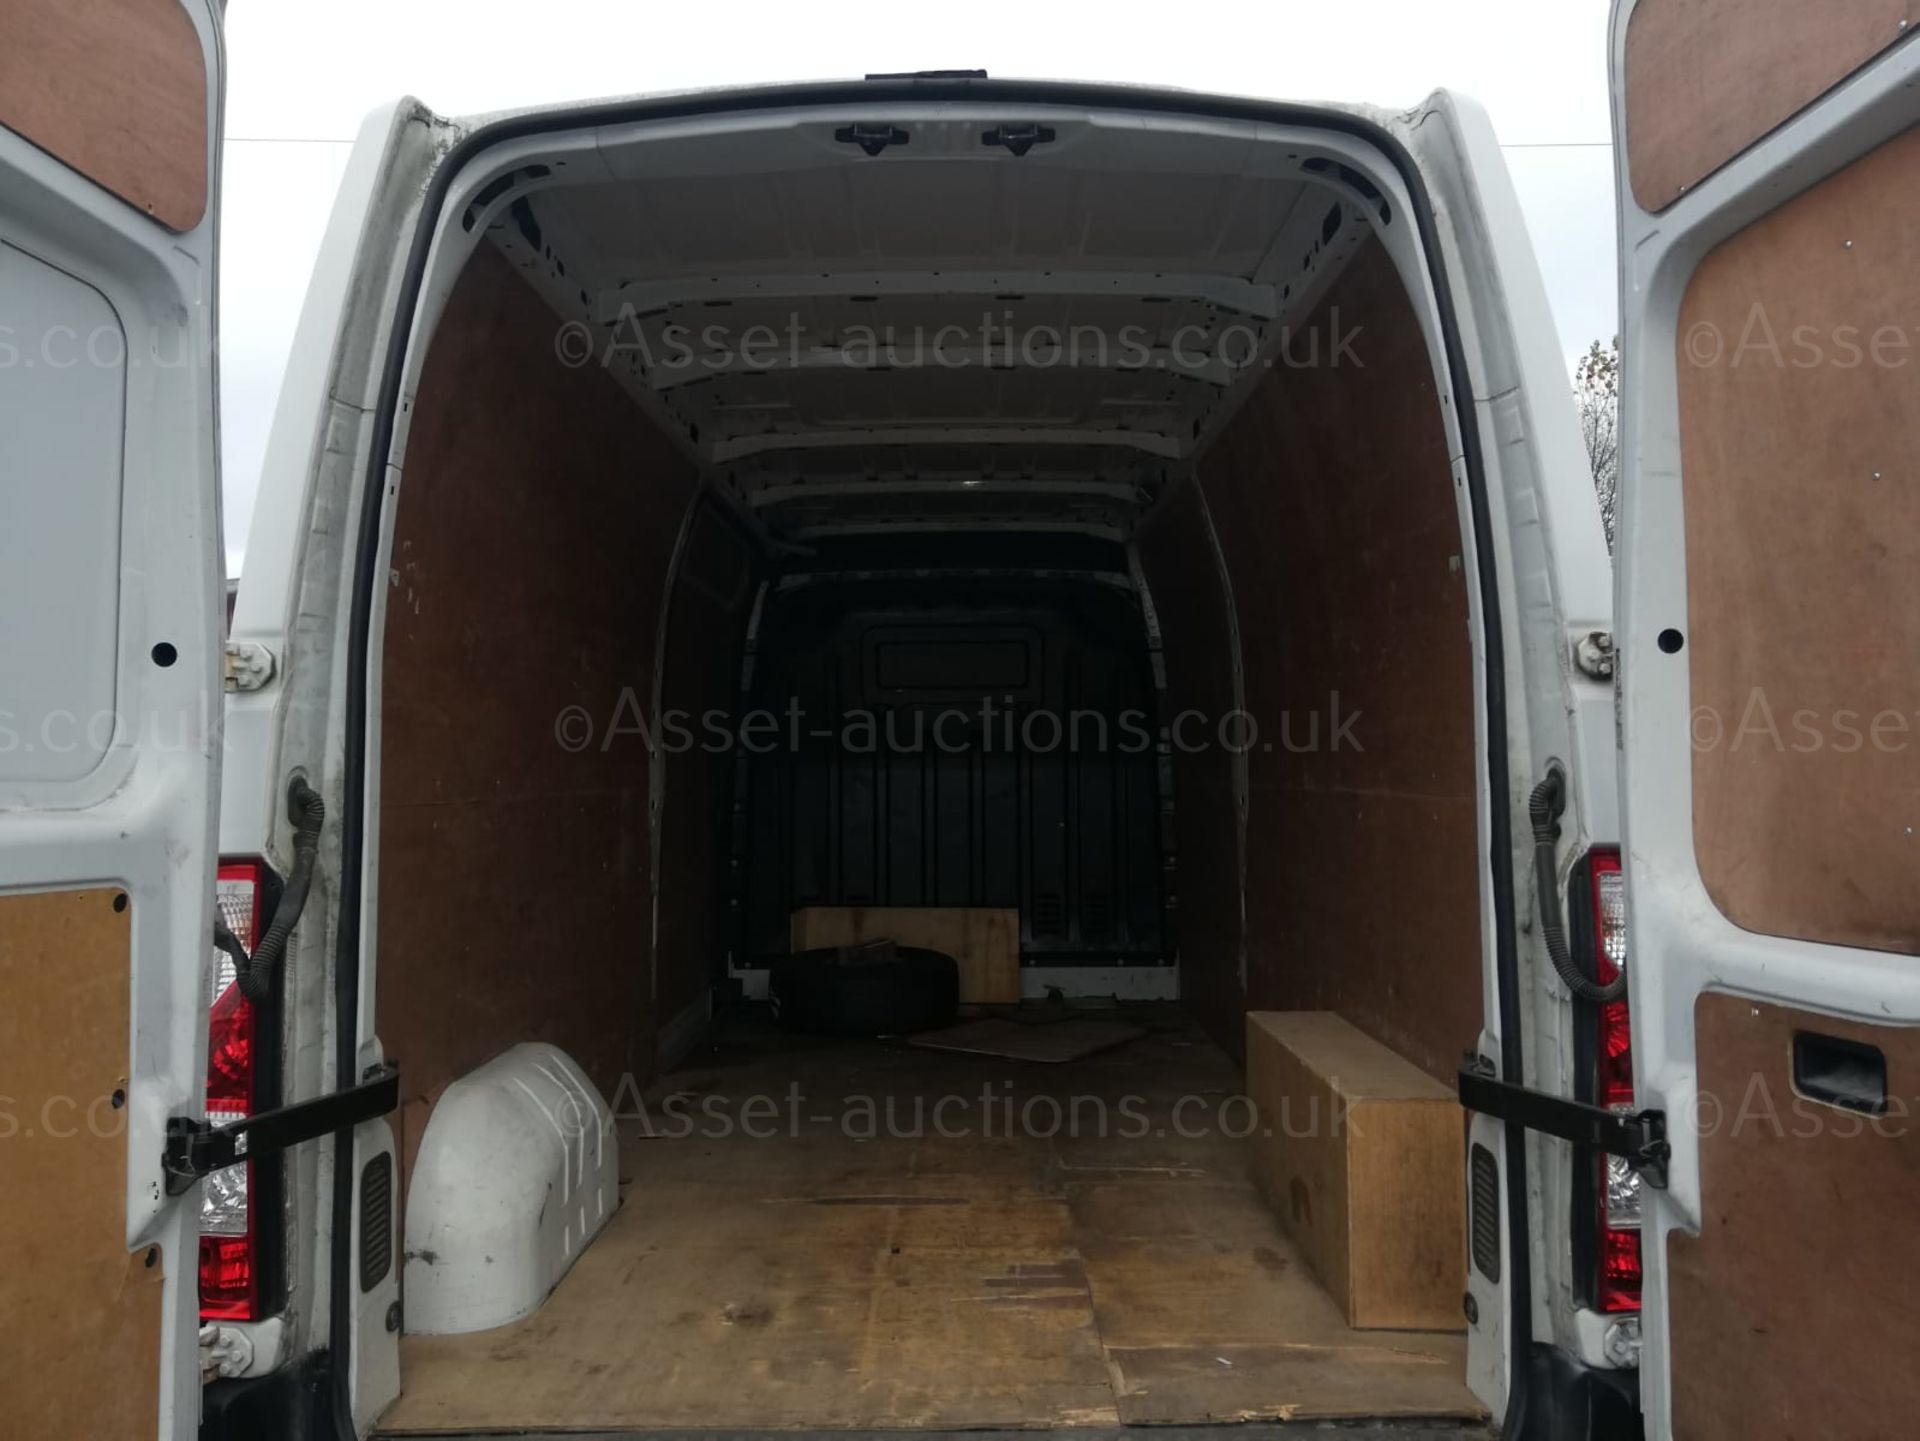 2017/17 RENAULT MASTER LM35 BUSINESS DCI L3H2 WHITE PANEL VAN, 106K MILES WITH SERVICE HISTORY - Image 8 of 9